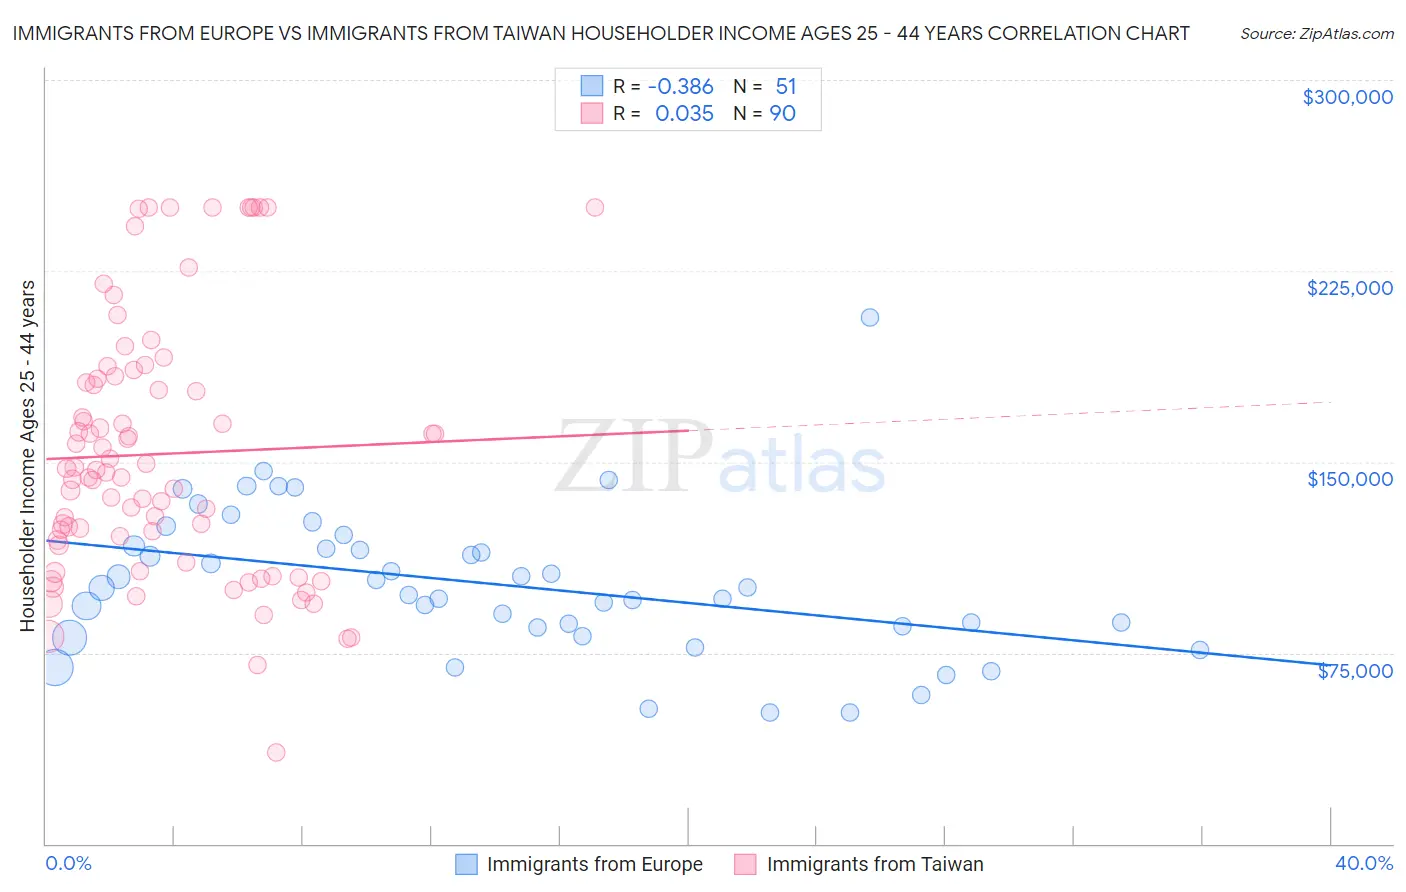 Immigrants from Europe vs Immigrants from Taiwan Householder Income Ages 25 - 44 years